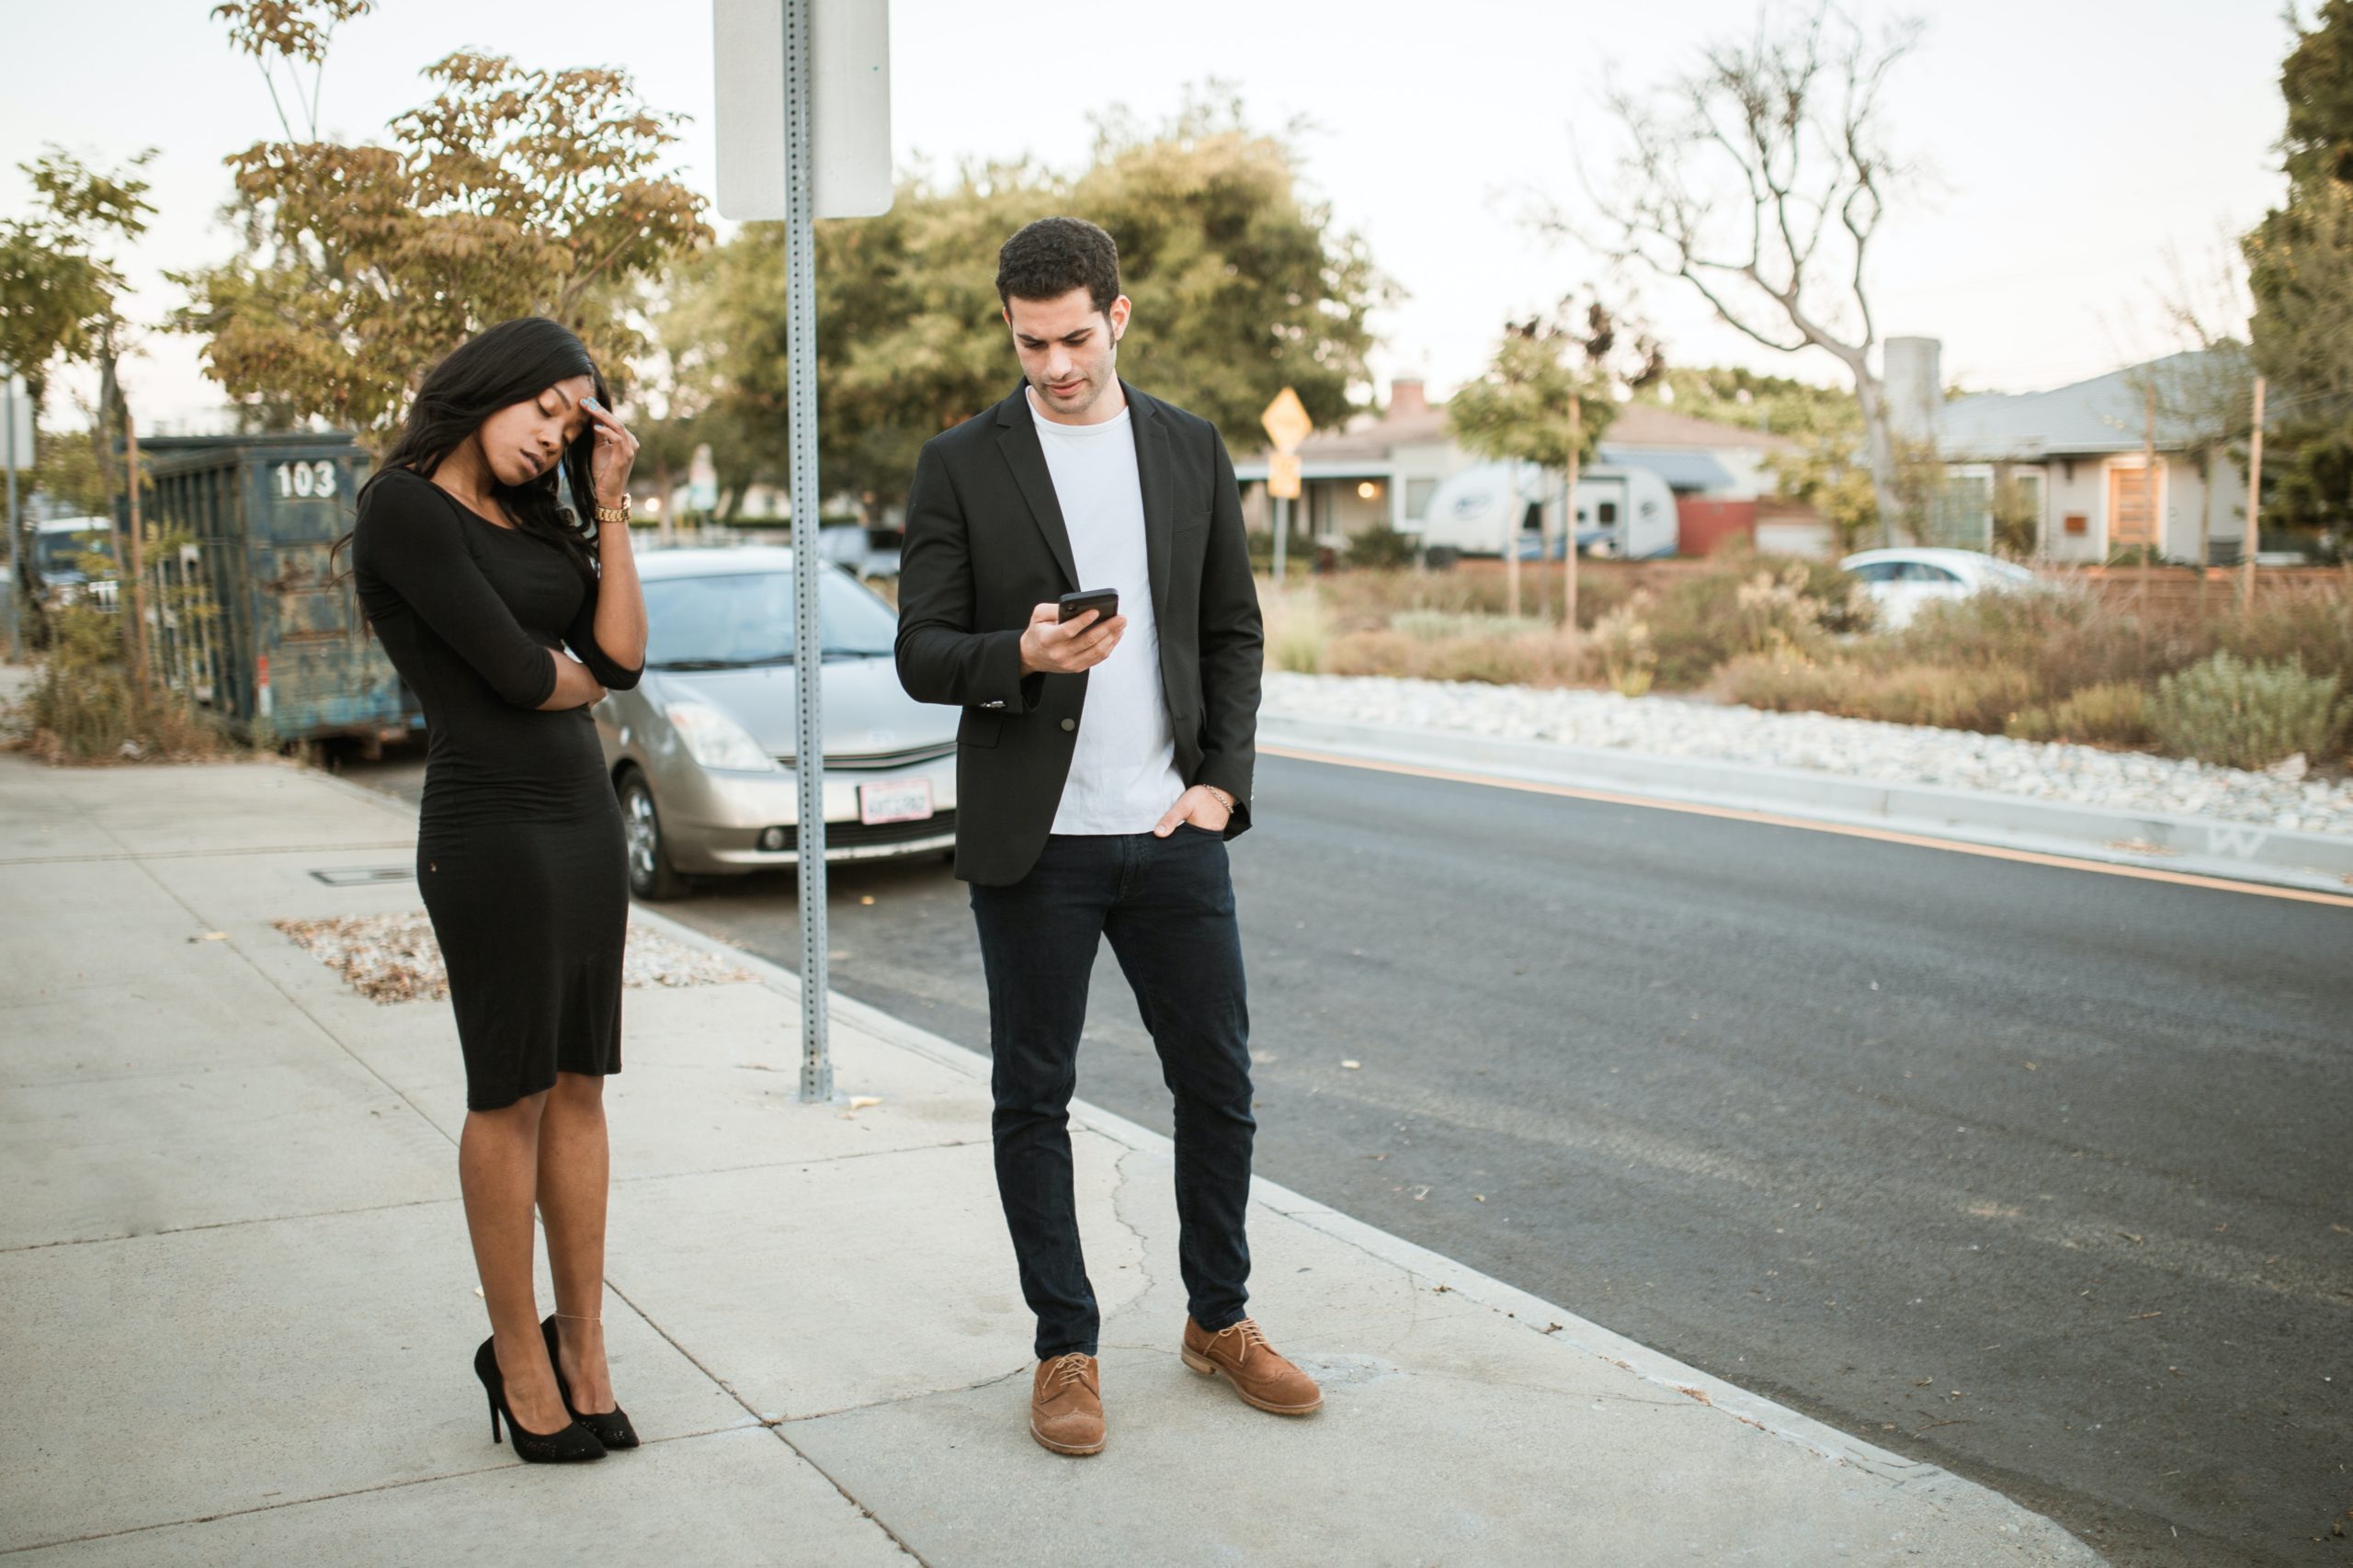 Frustrated Black woman standing next to her partner who's distracted by his phone